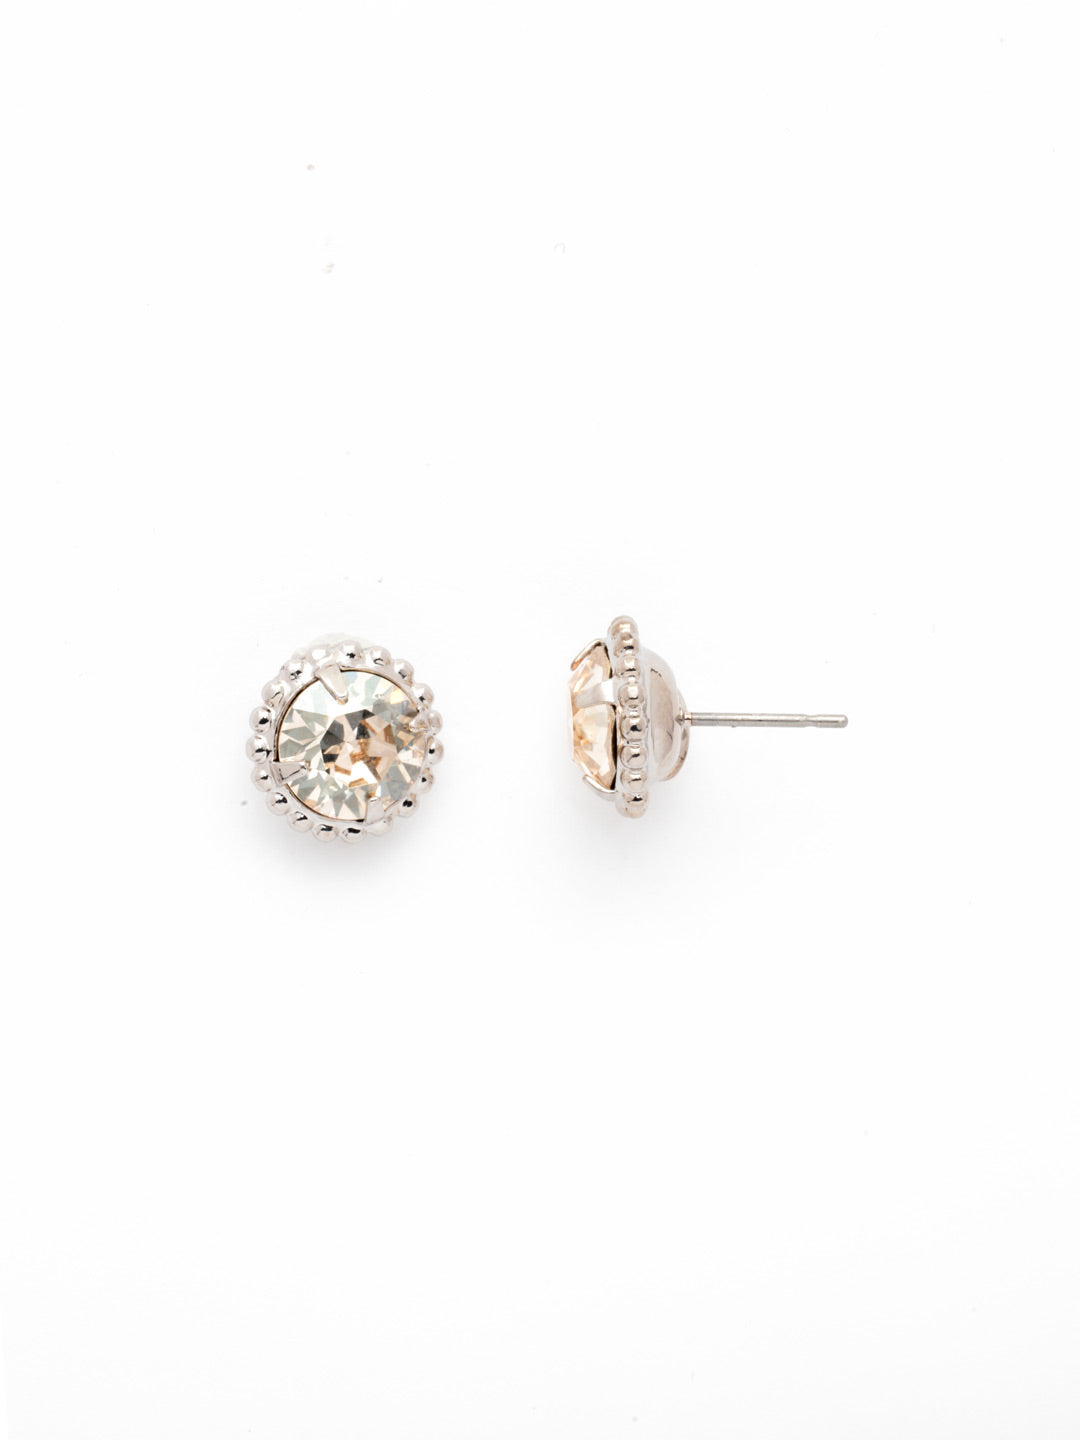 Simplicity Stud Earrings - EBY38RHCCH - <p>A timeless classic, the Simplicity Stud Earrings feature round cut crystals in a variety of colors; accented with a halo of metal beaded detail. Need help picking a stud? <a href="https://www.sorrelli.com/blogs/sisterhood/round-stud-earrings-101-a-rundown-of-sizes-styles-and-sparkle">Check out our size guide!</a> From Sorrelli's Crystal Champagne collection in our Palladium Silver-tone finish.</p>